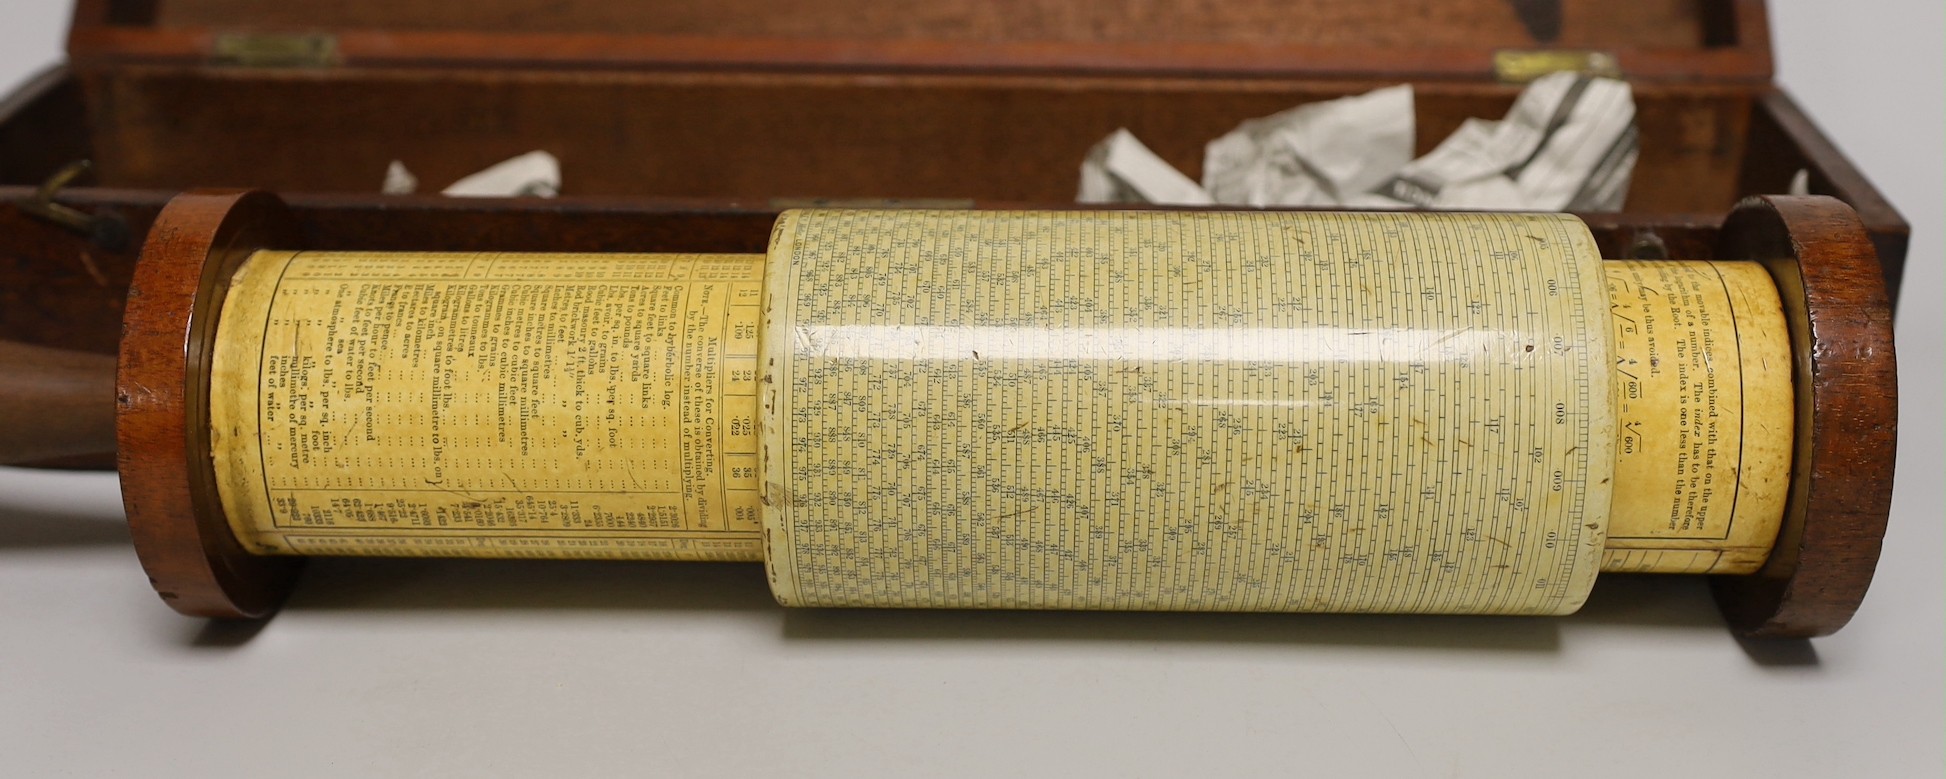 A Fuller's helical slide-rule calculator, made by Stanley, London, in original box